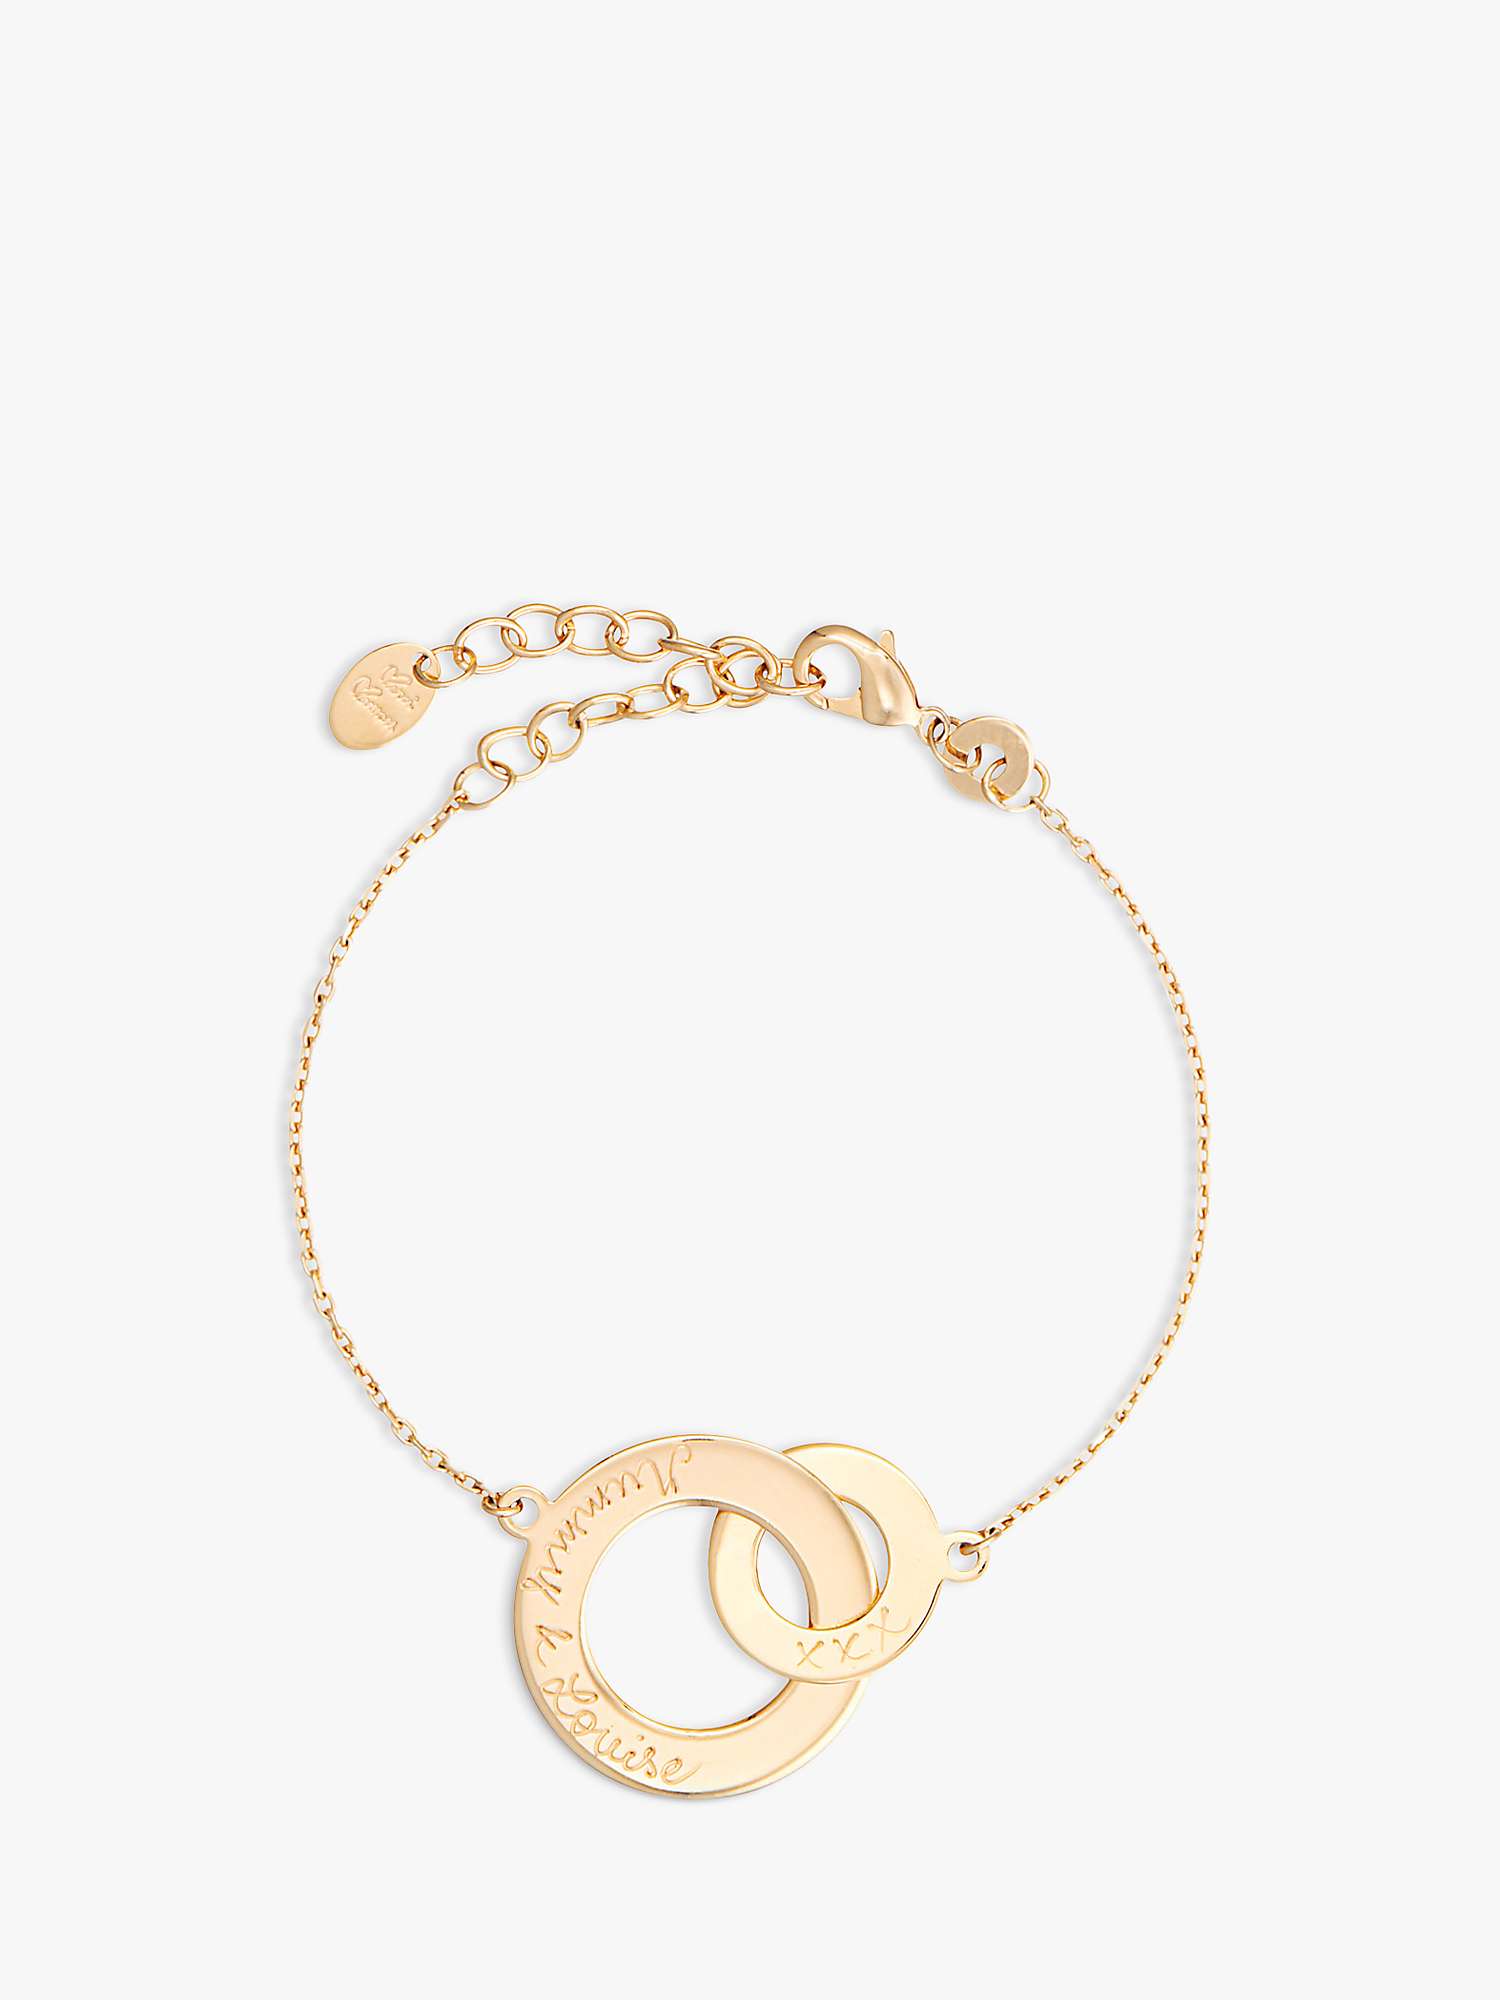 Buy Merci Maman Personalised Intertwined Chain Bracelet Online at johnlewis.com